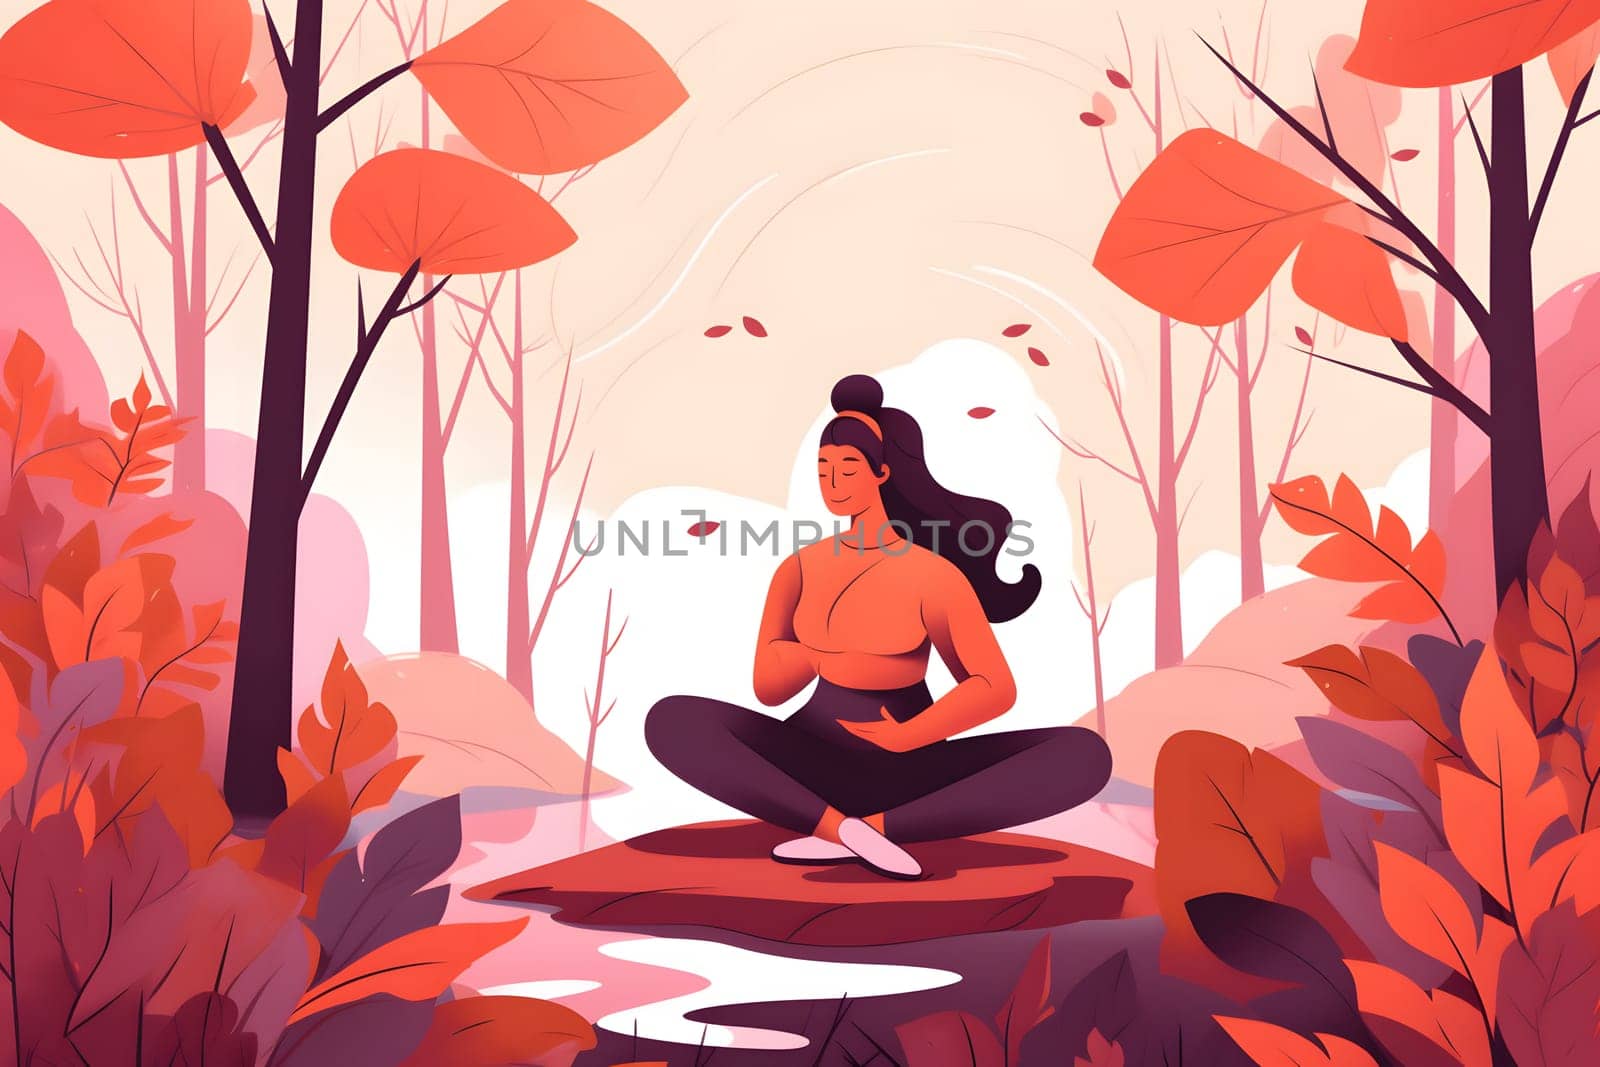 2d flat style illustration of woman meditating in autumn forest in lotus position surrounded with leaves., neural network generated image by z1b